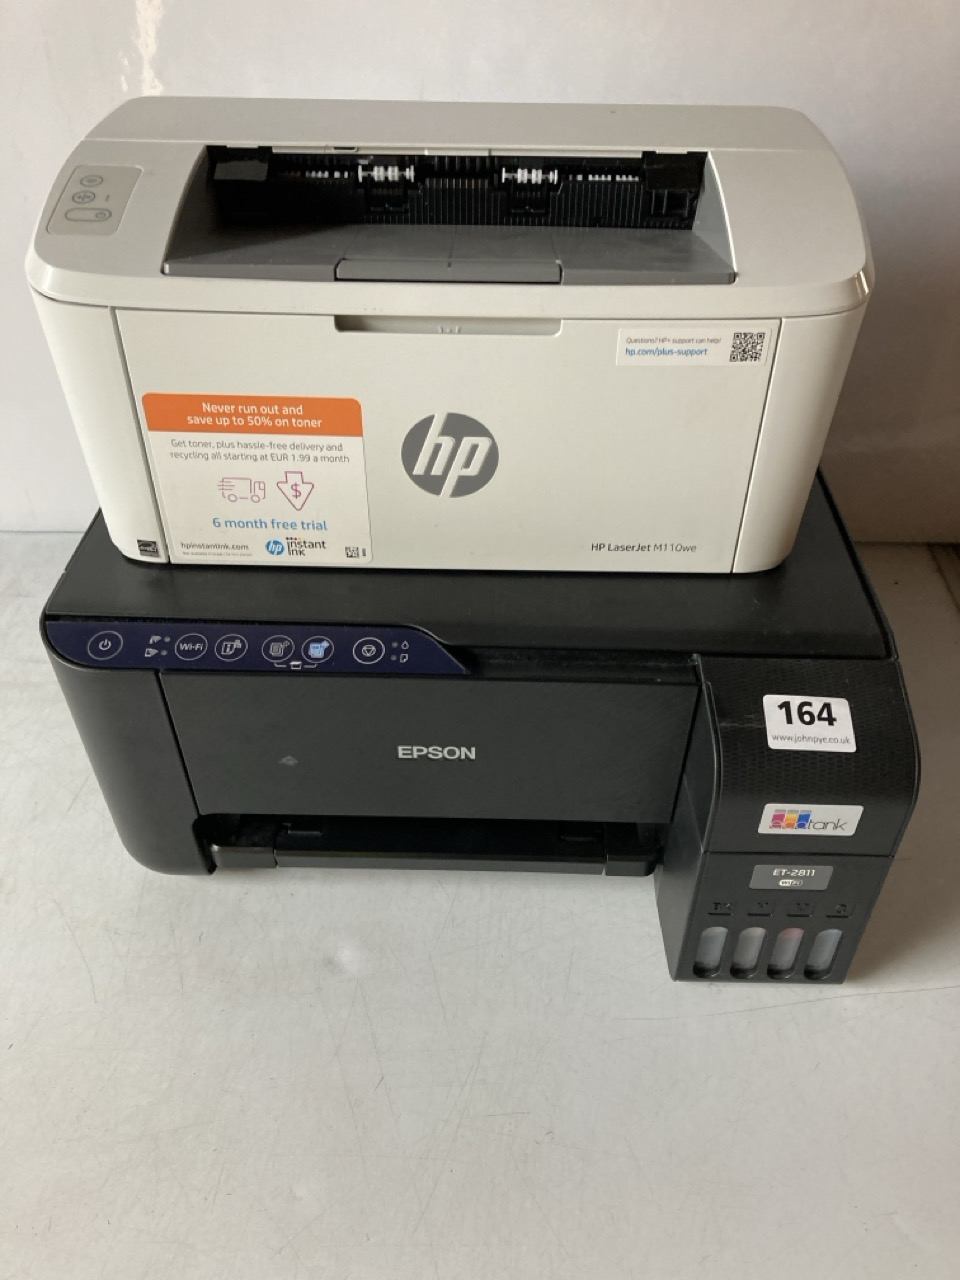 1 X EPSON PRINTER, ET-2811 (UNBOXED) TOGETHER WITH A HP LASERJET PRINTER, M110WE (UNBOXED)